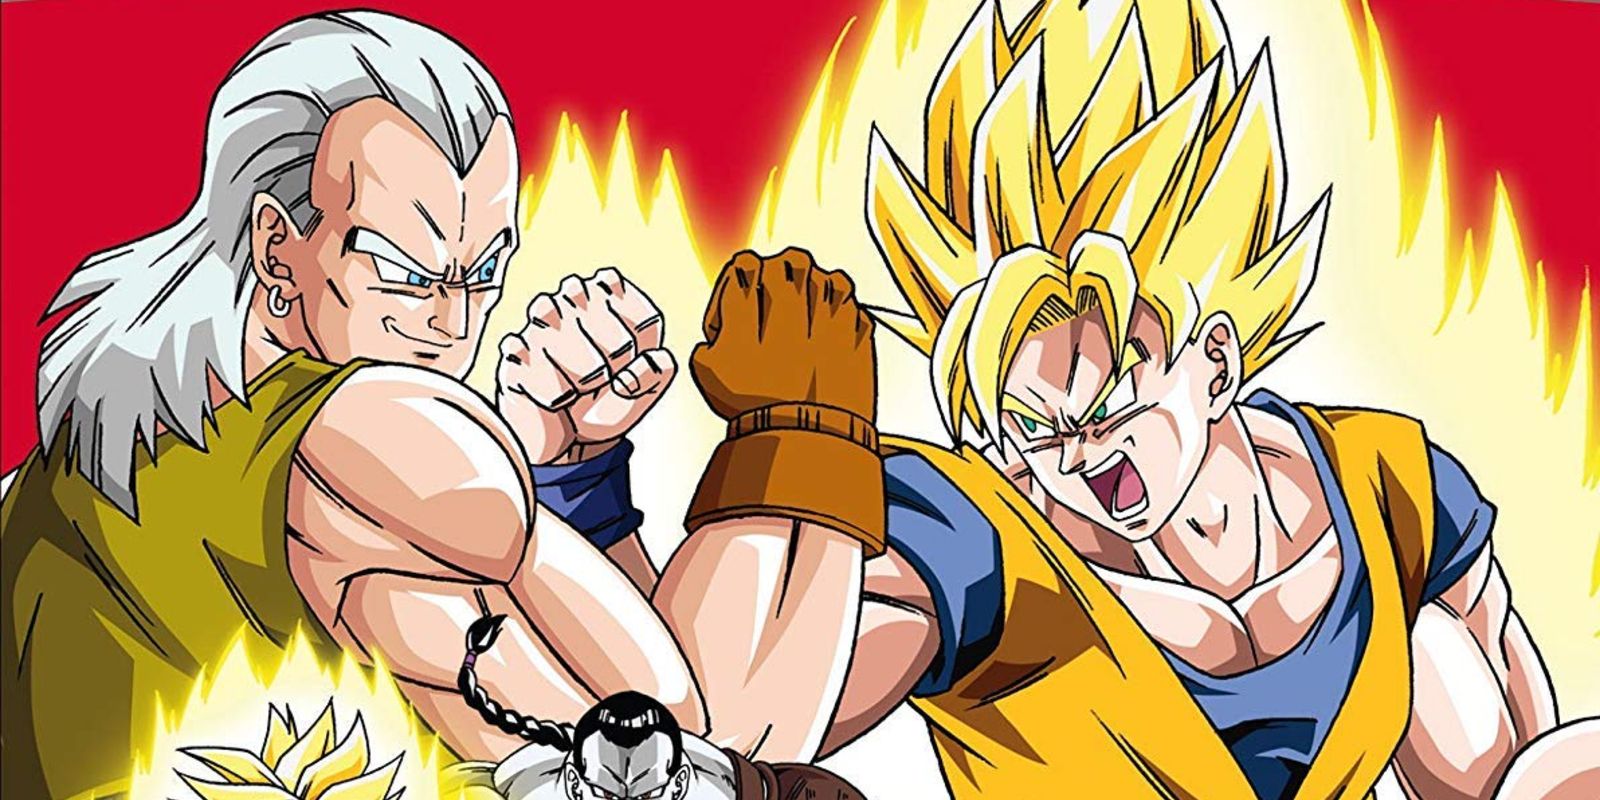 Goku fighting Android 13 in artwork for Dragon Ball Z: Super Android 13